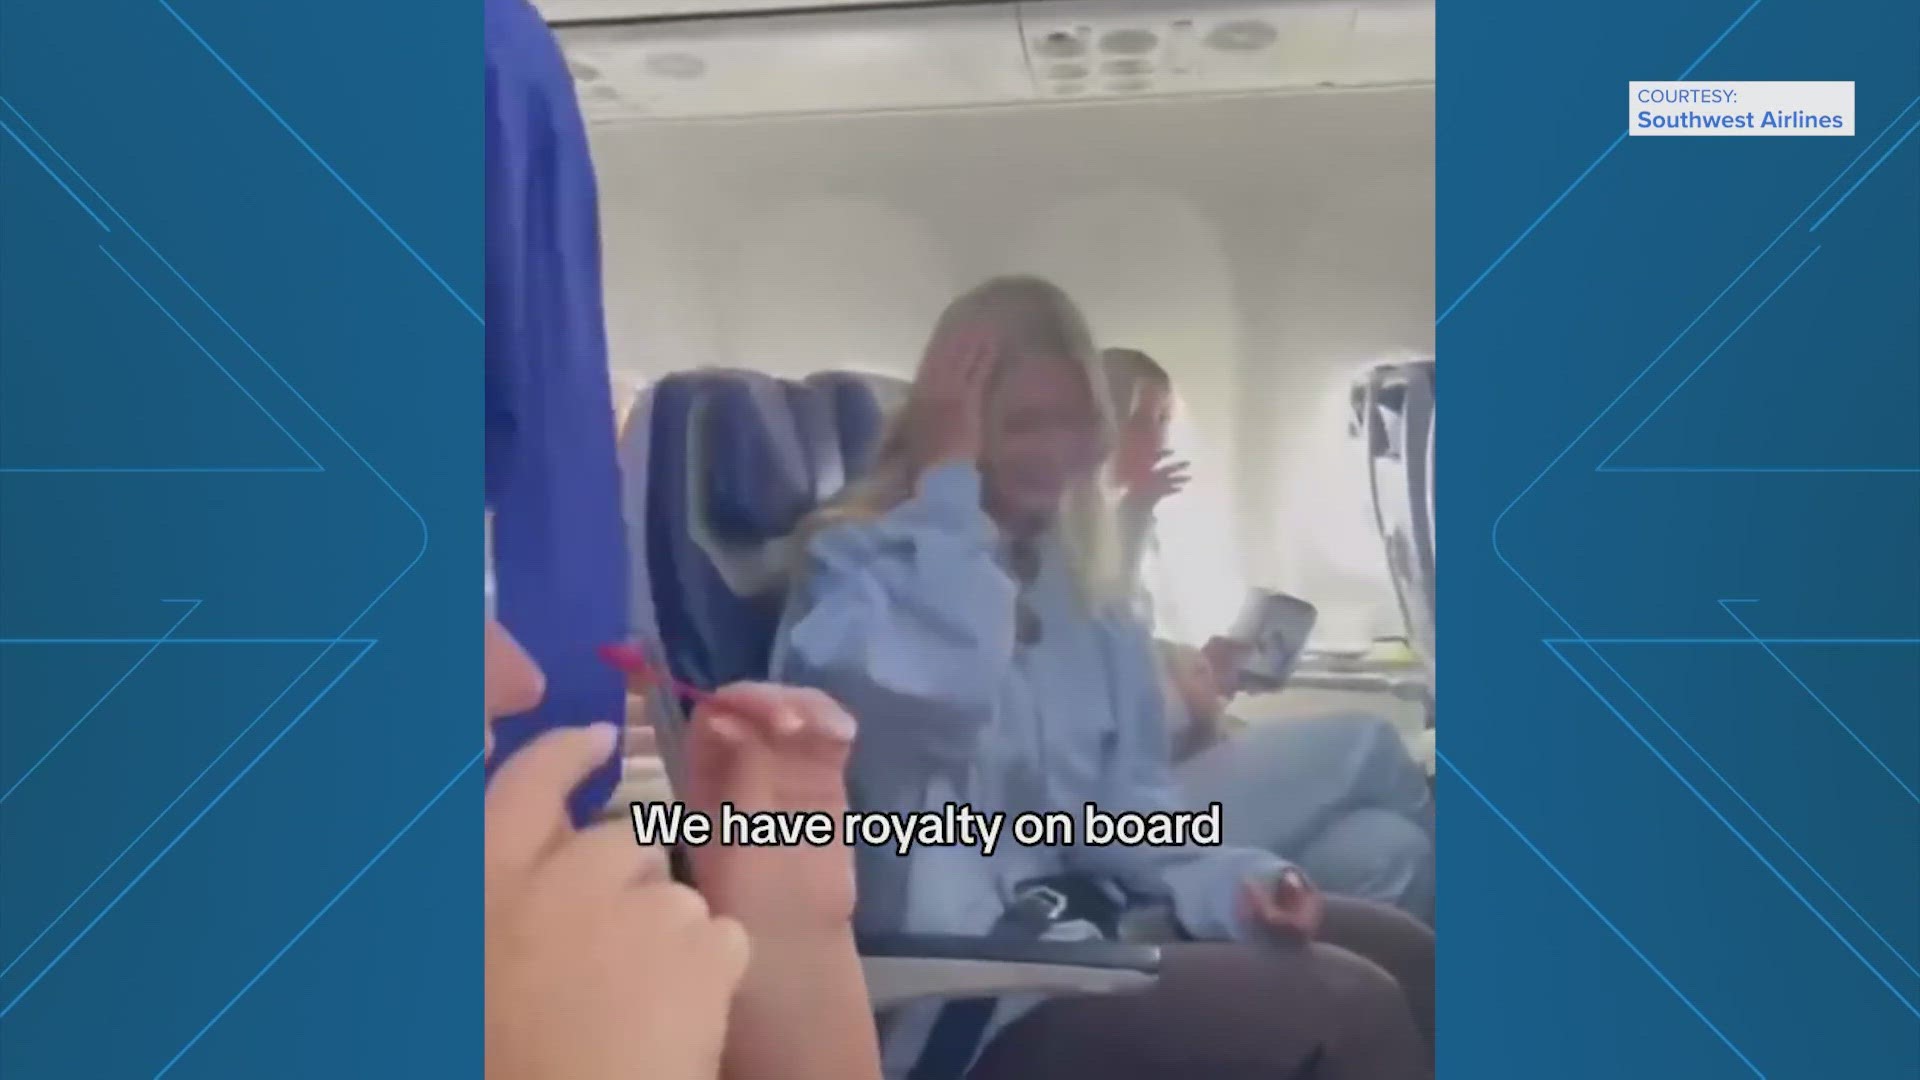 A bride-to-be got a surprise as she was celebrated on her flight.